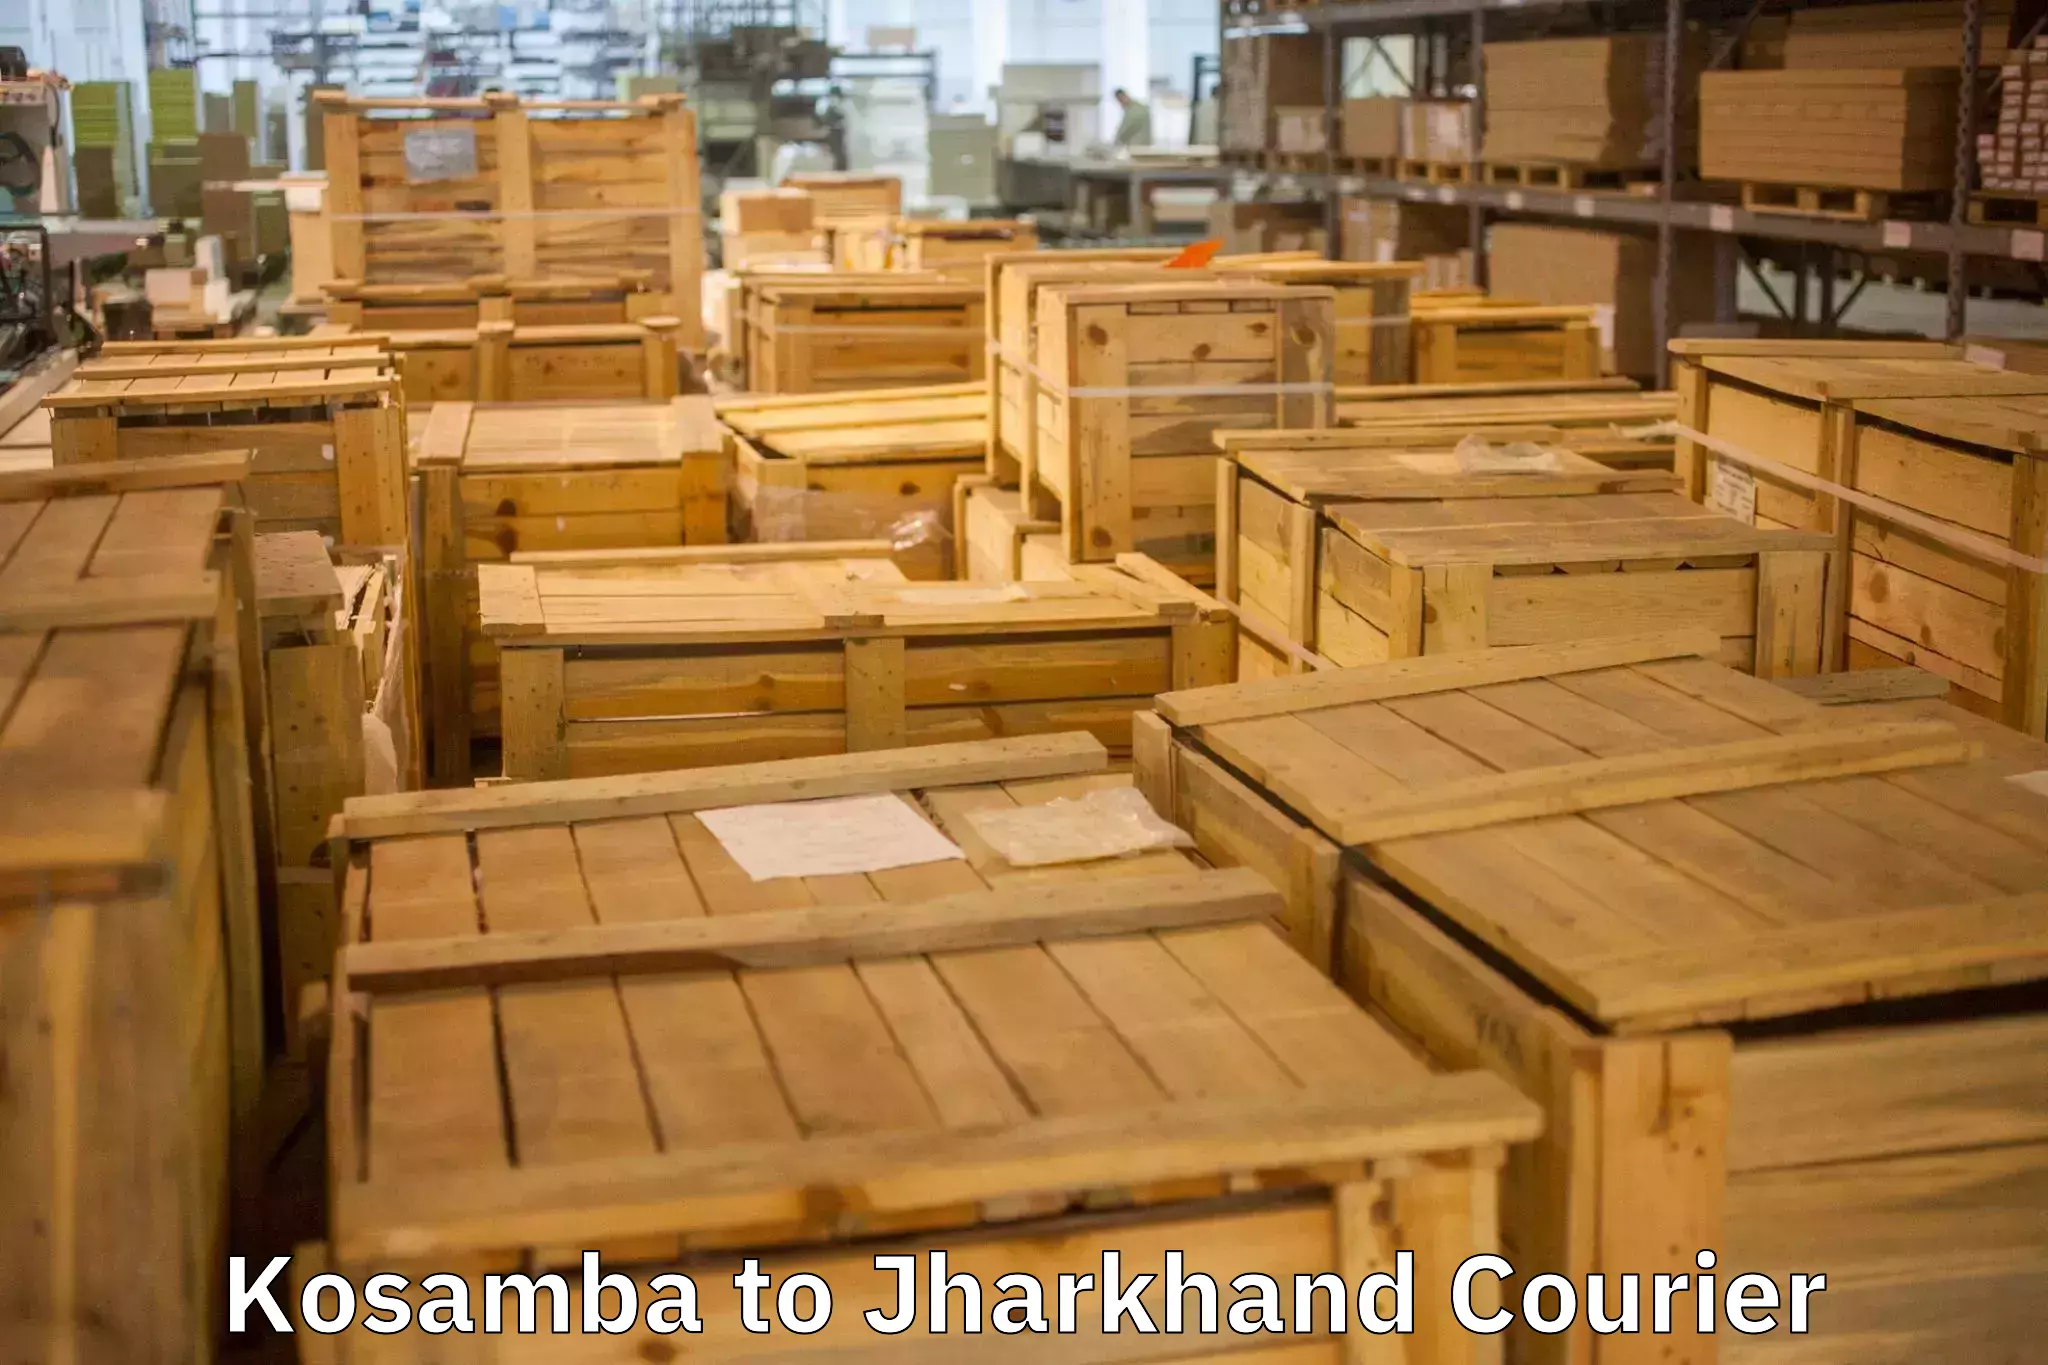 Moving and handling services in Kosamba to Jharkhand